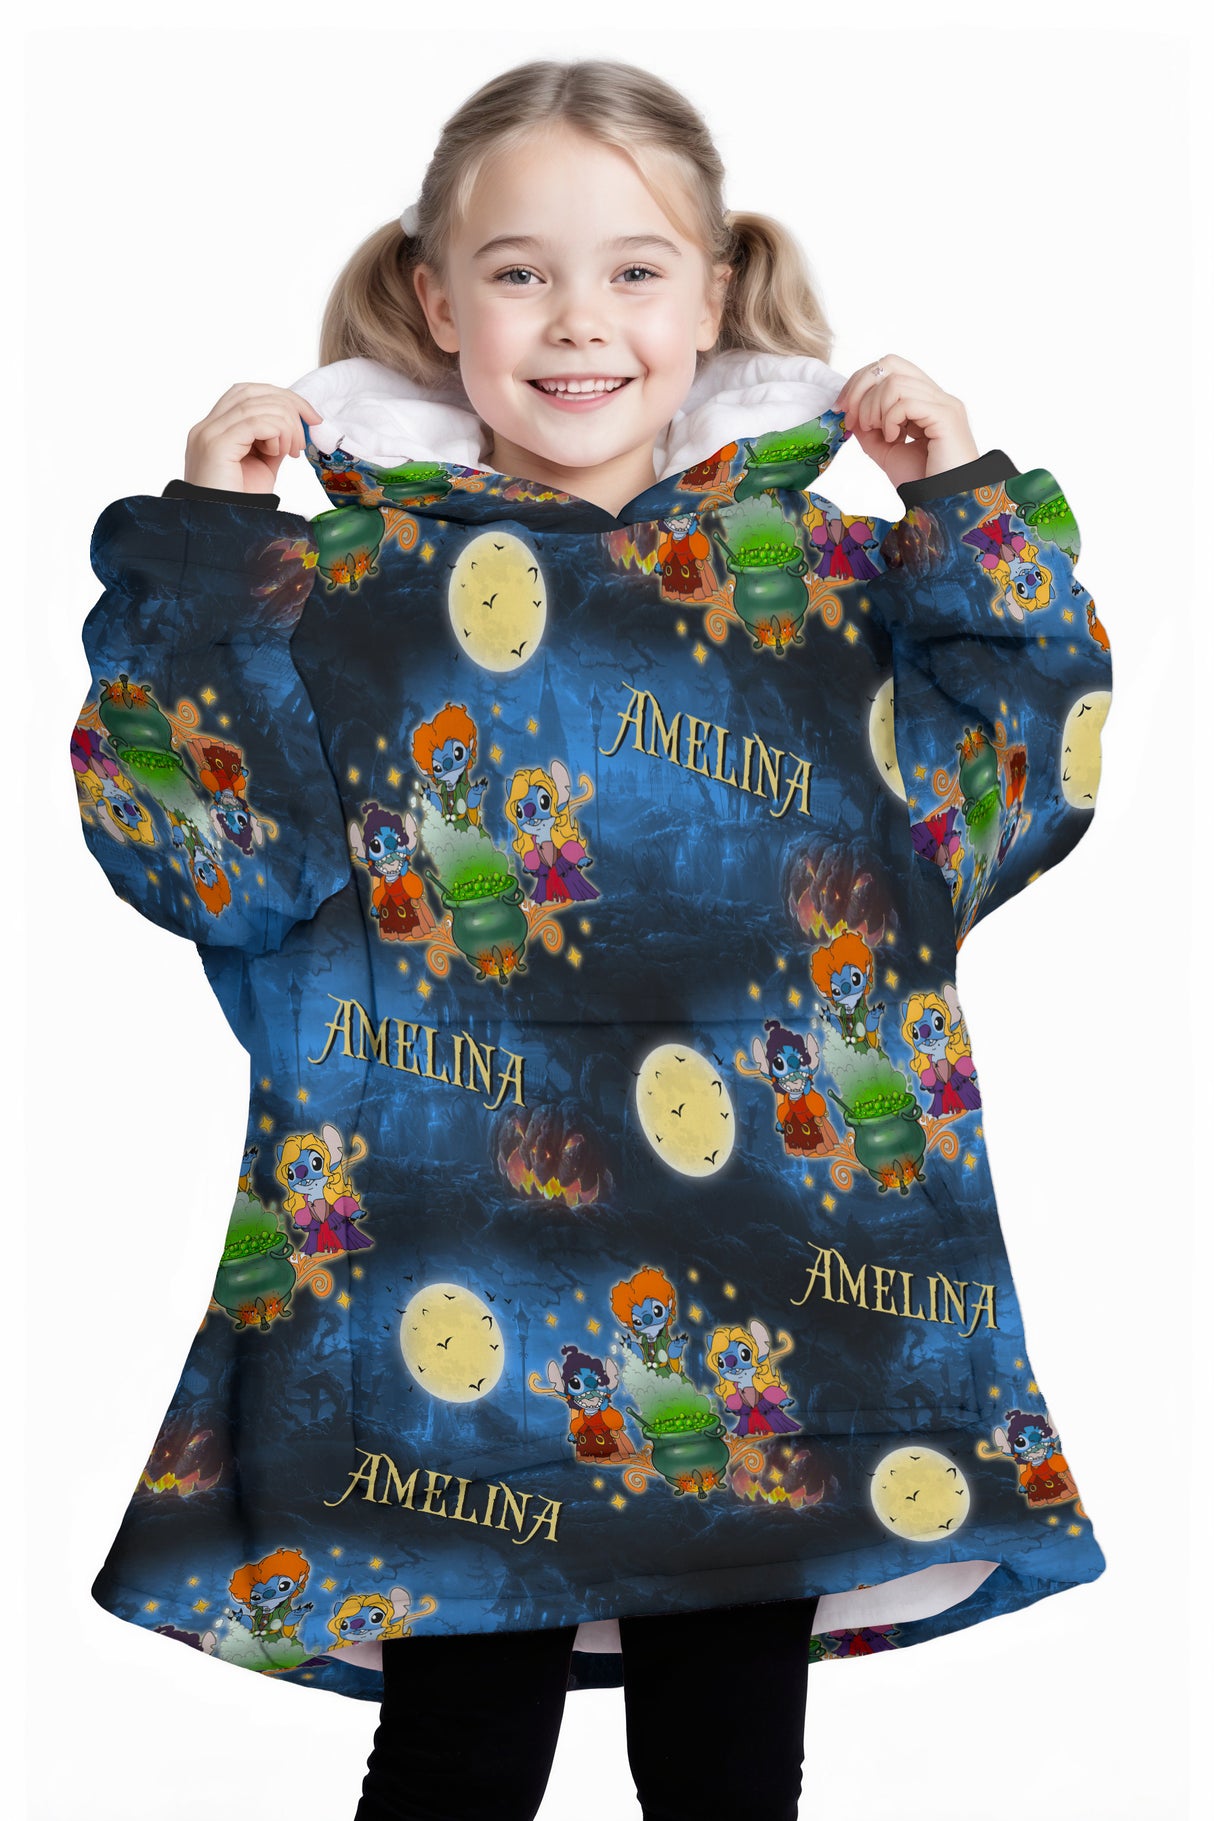 Personalized Snug Sherpa Oversized Wearable Stitchy Sisters Halloween Horror Film Hoodie Blanket